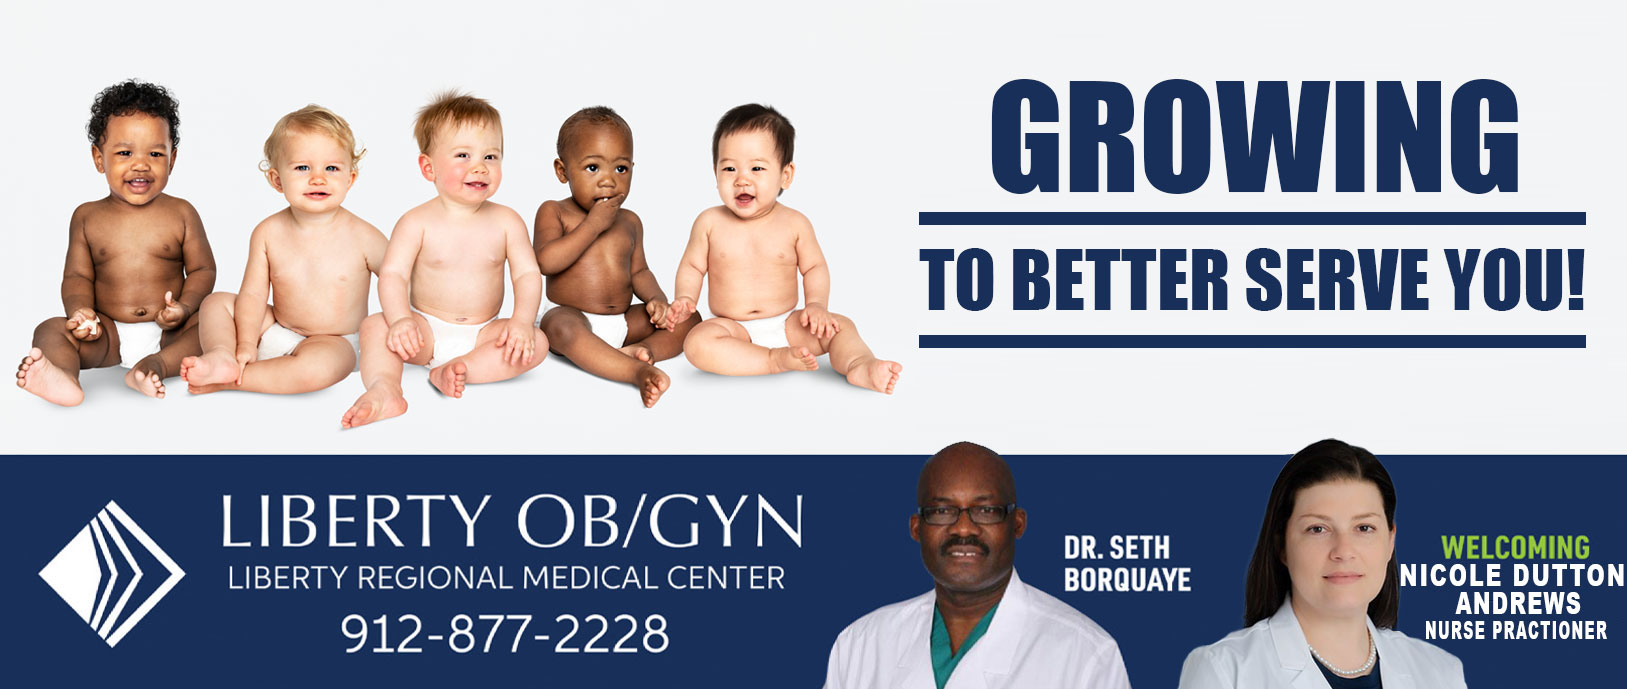 Growing to better serve you!
Liberty OB/GYN
912-877-2228